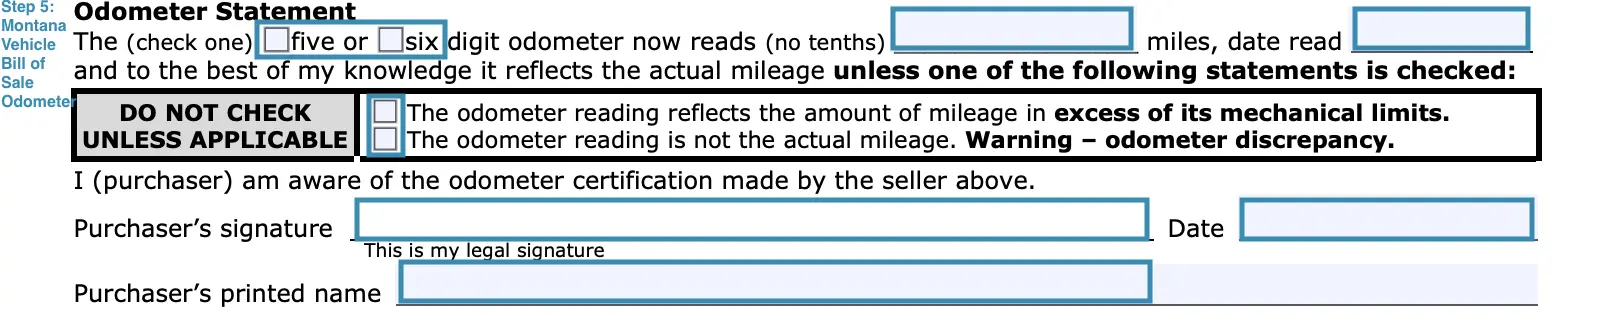 step 5 to filling out a montana vehicle bill of sale example odometer